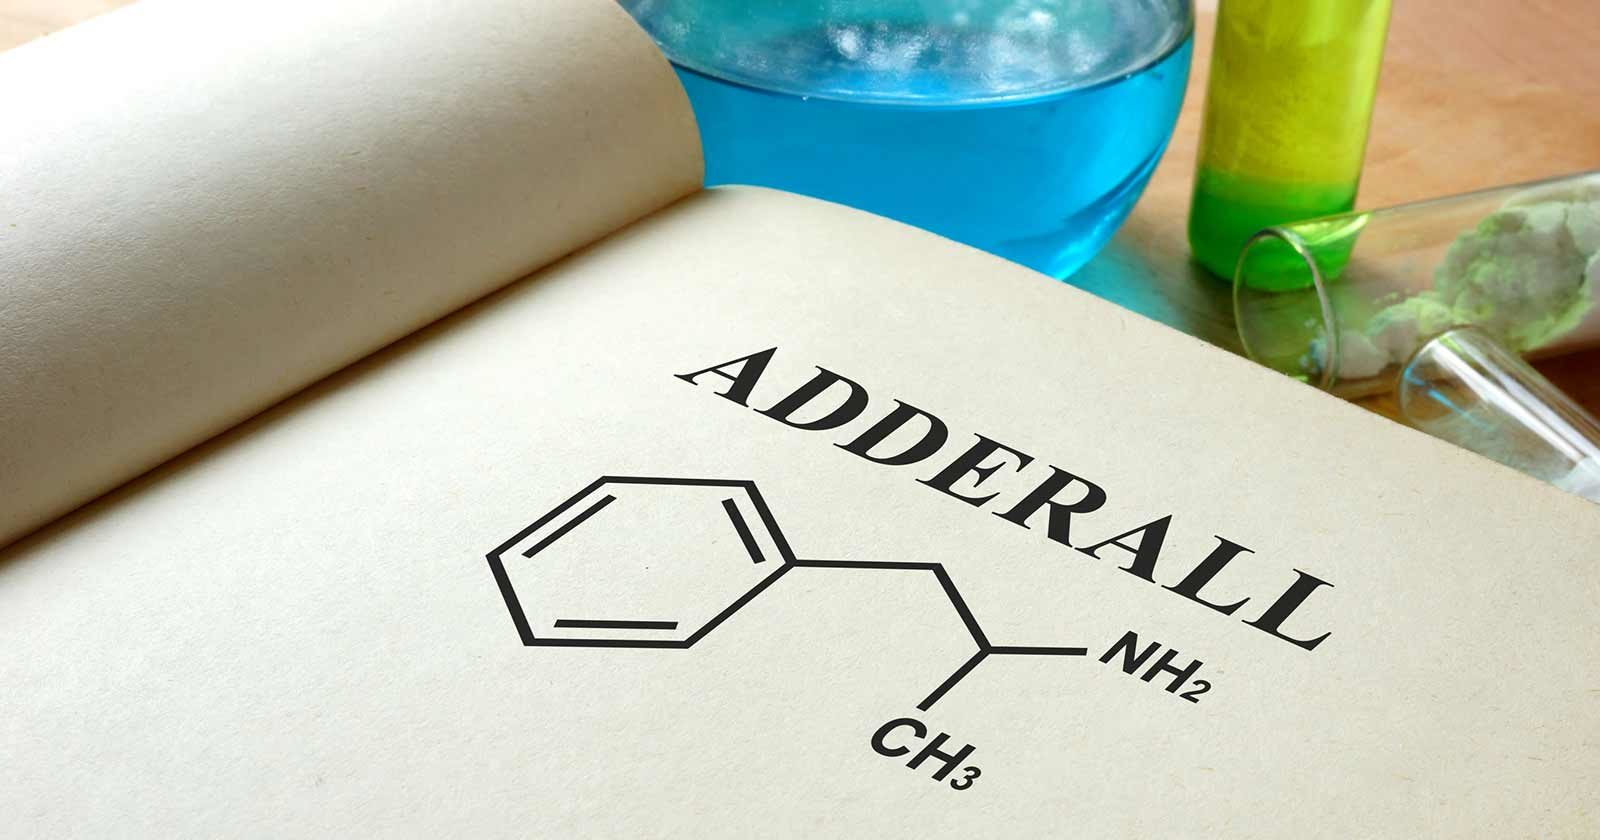 everything you'll ever need to know about Adderall